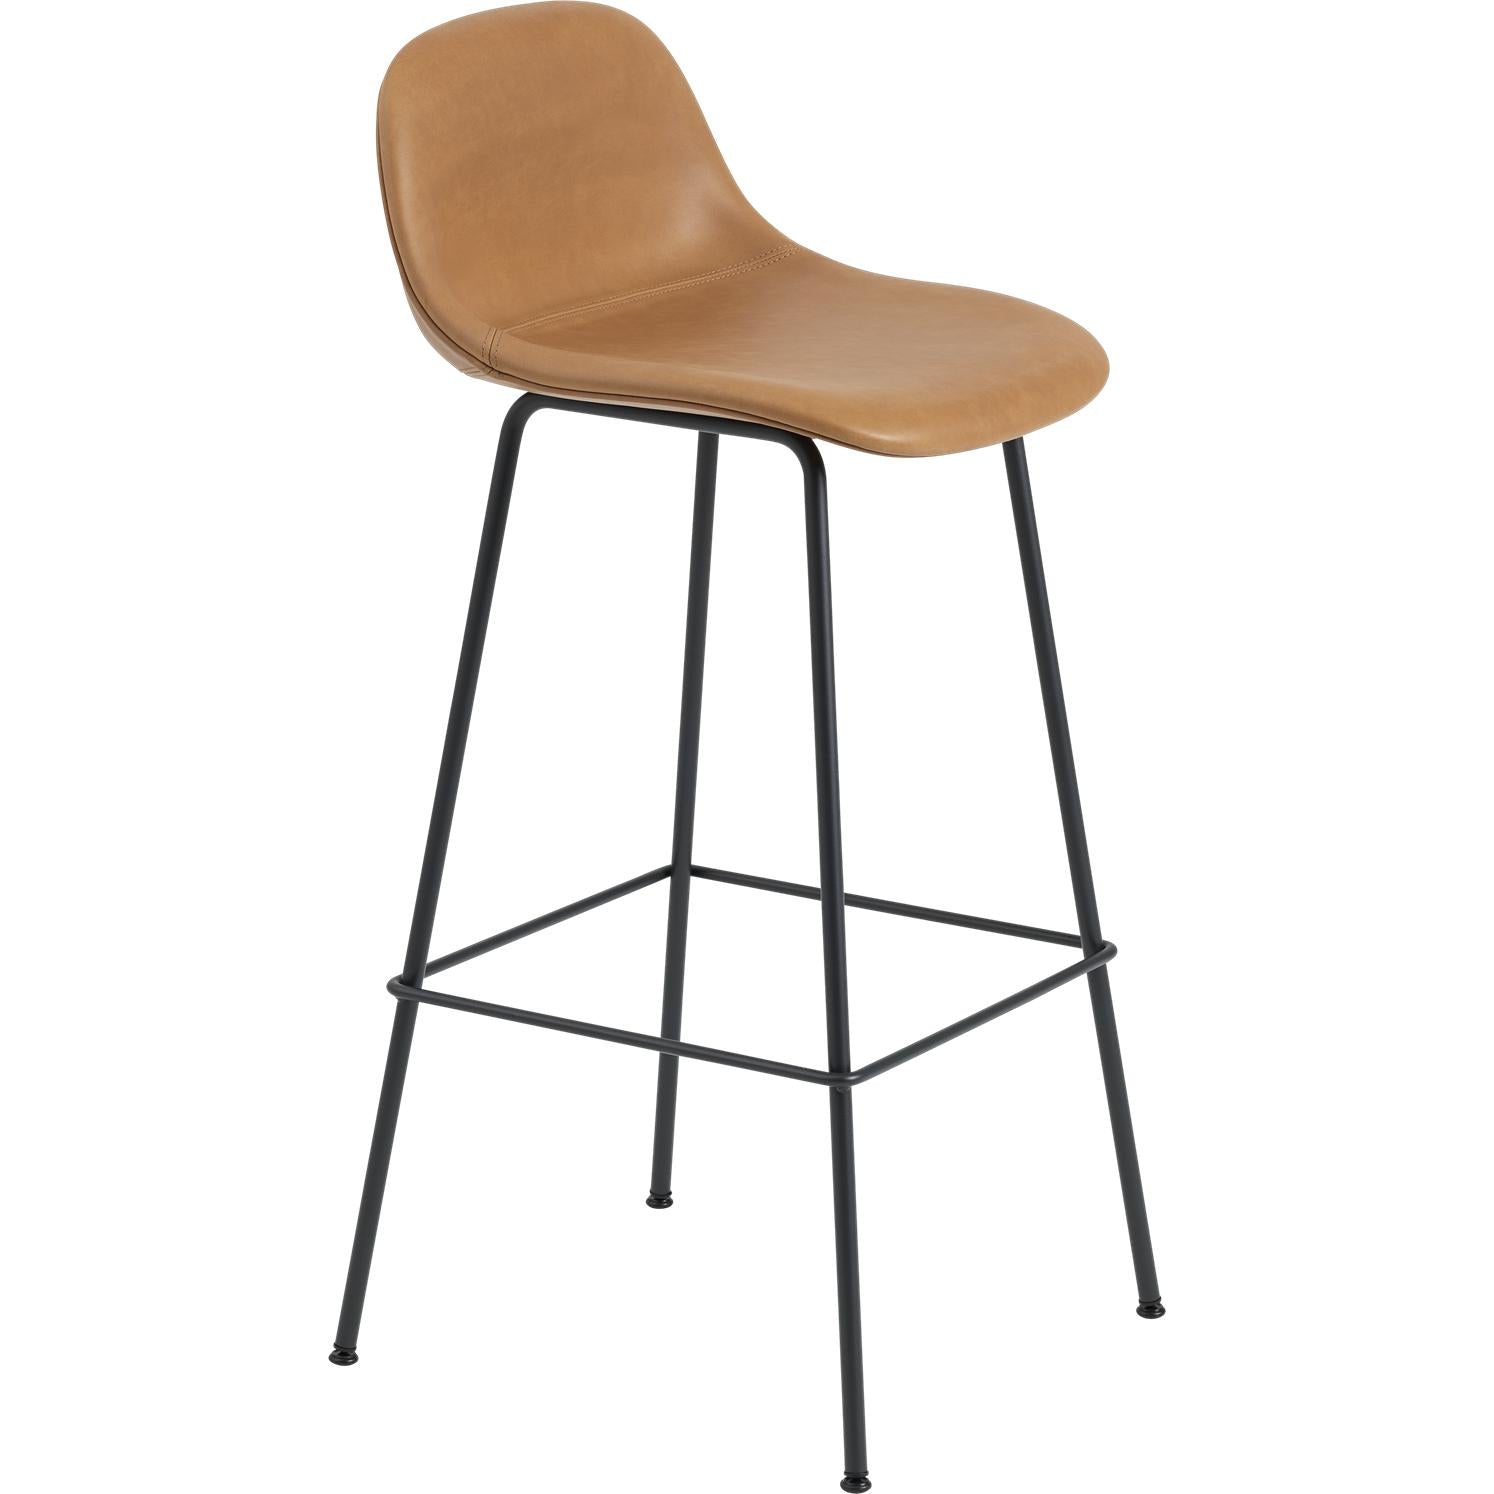 Muuto Fiber Bar Chair With Backrest Tube Base, Fiber/Leather Seat, Brown Cognac Leather